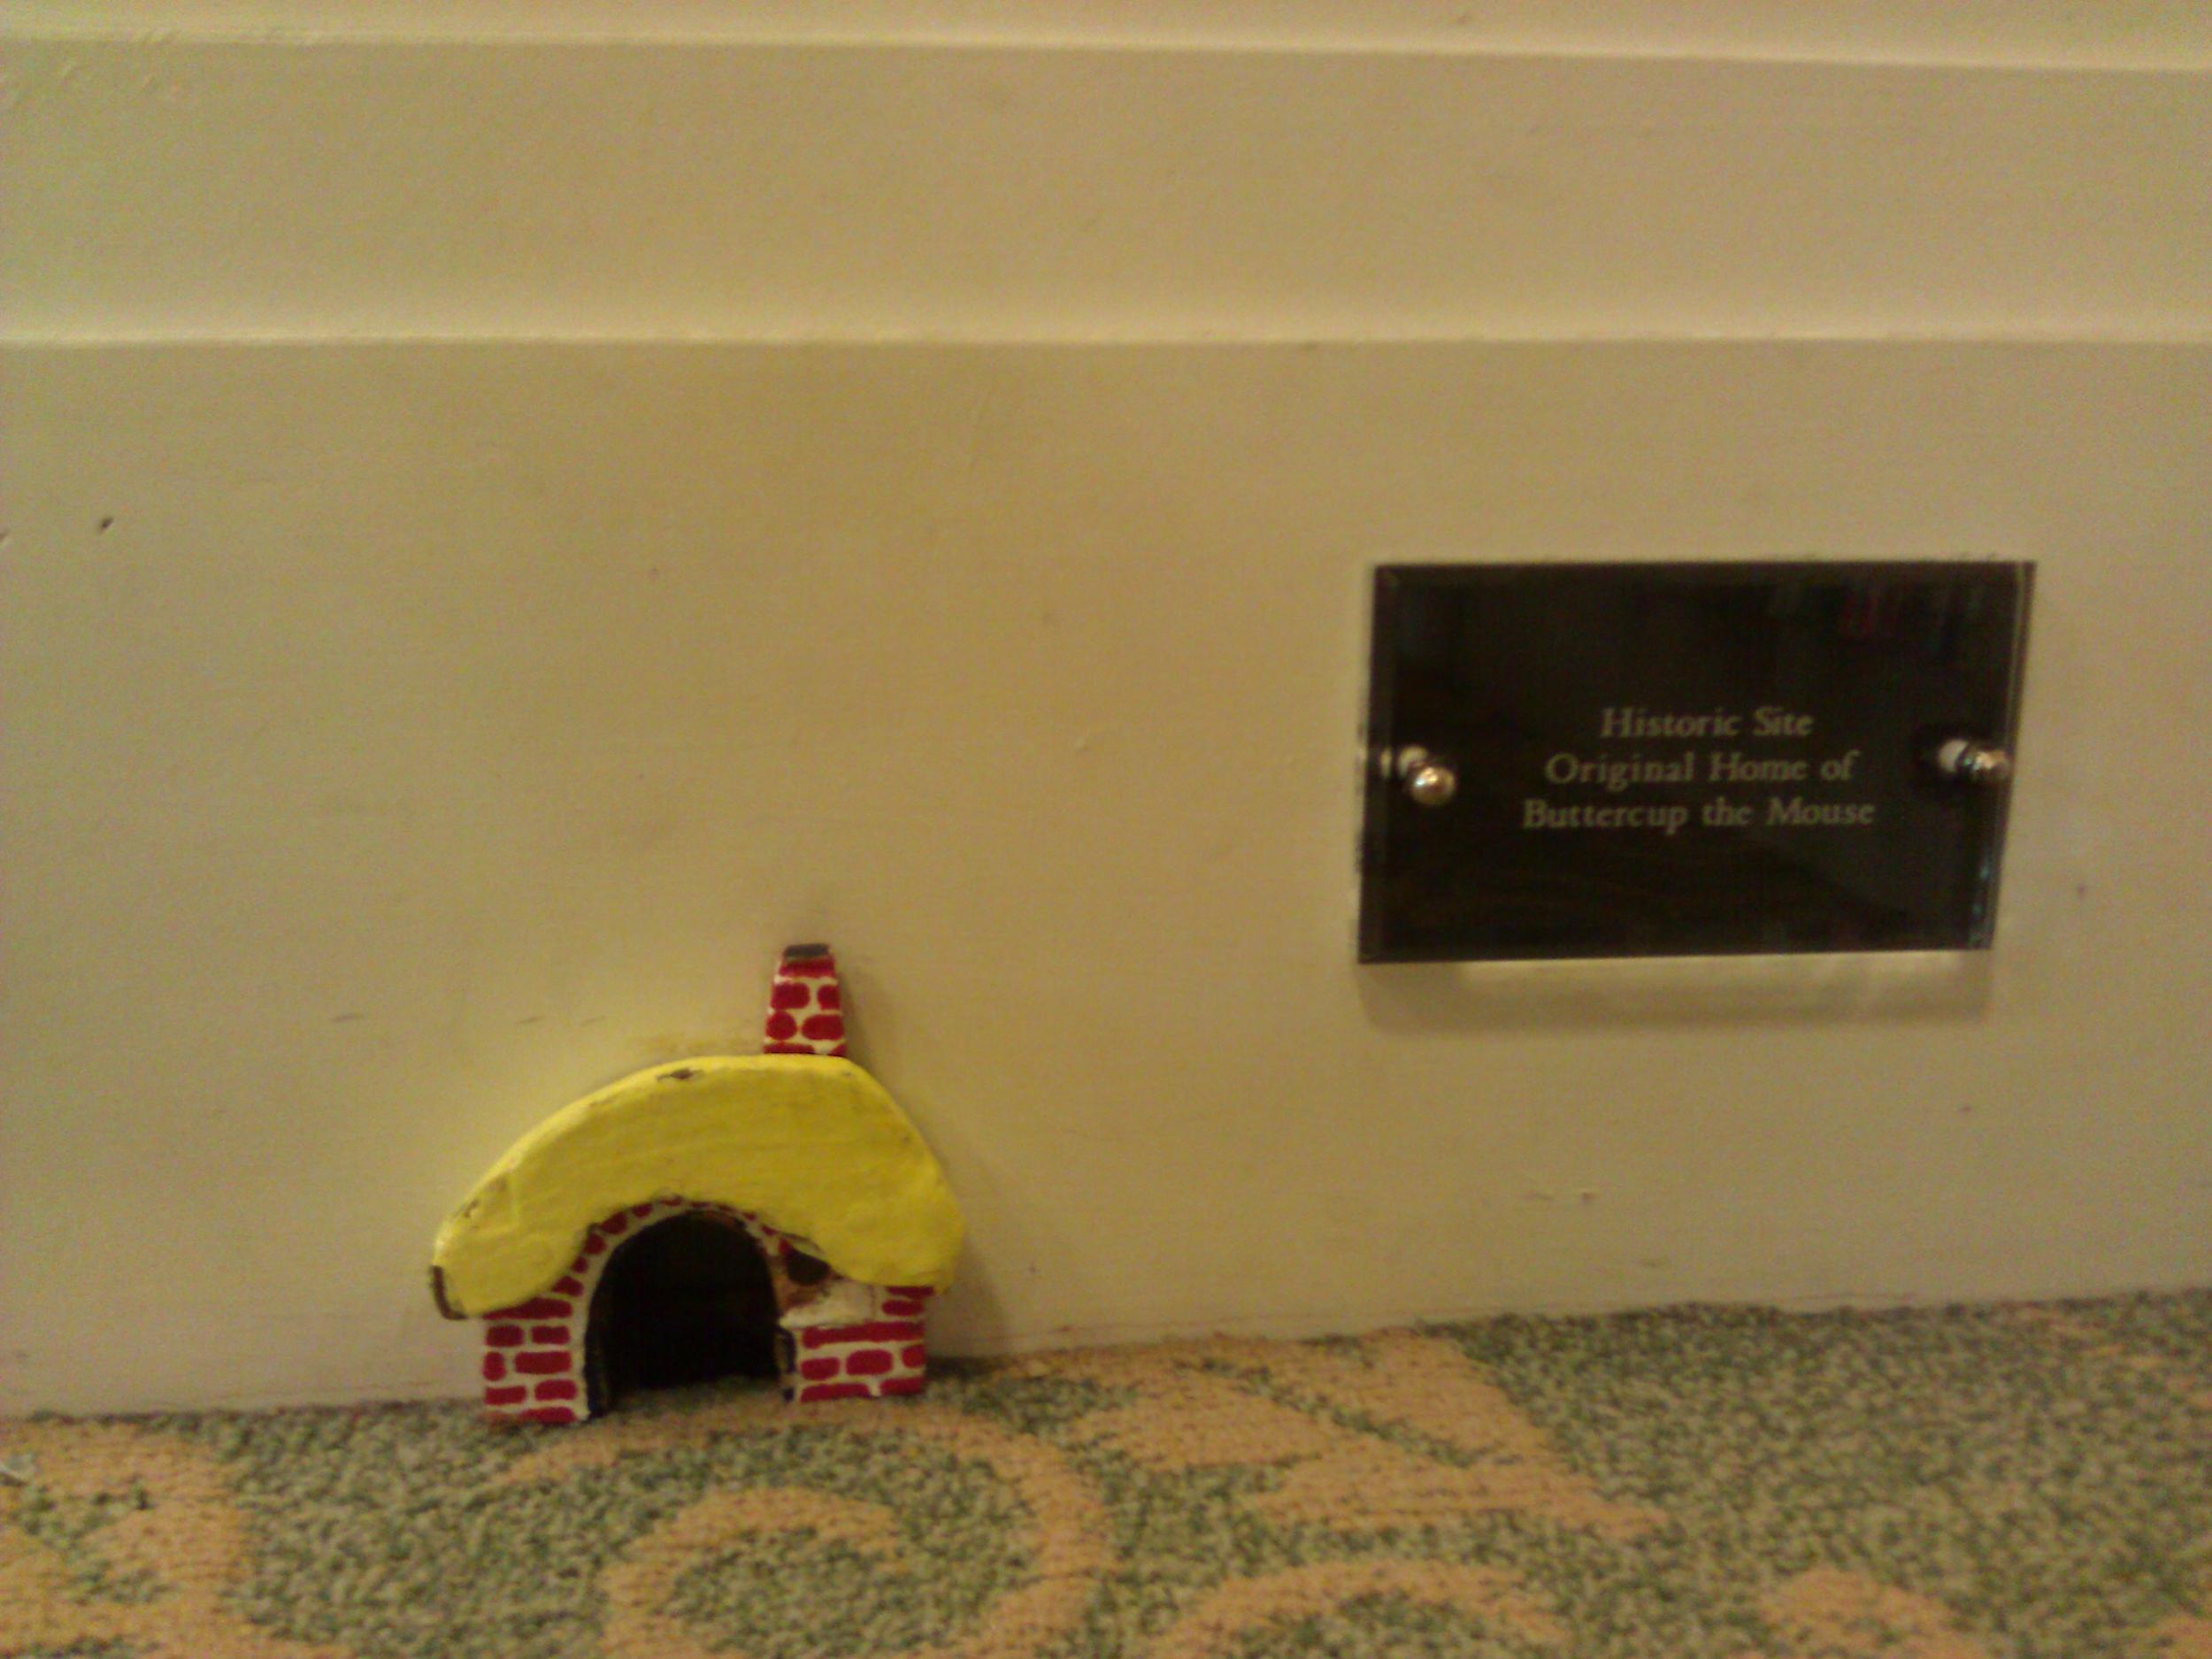 A snazzy mouse house in the children's section.